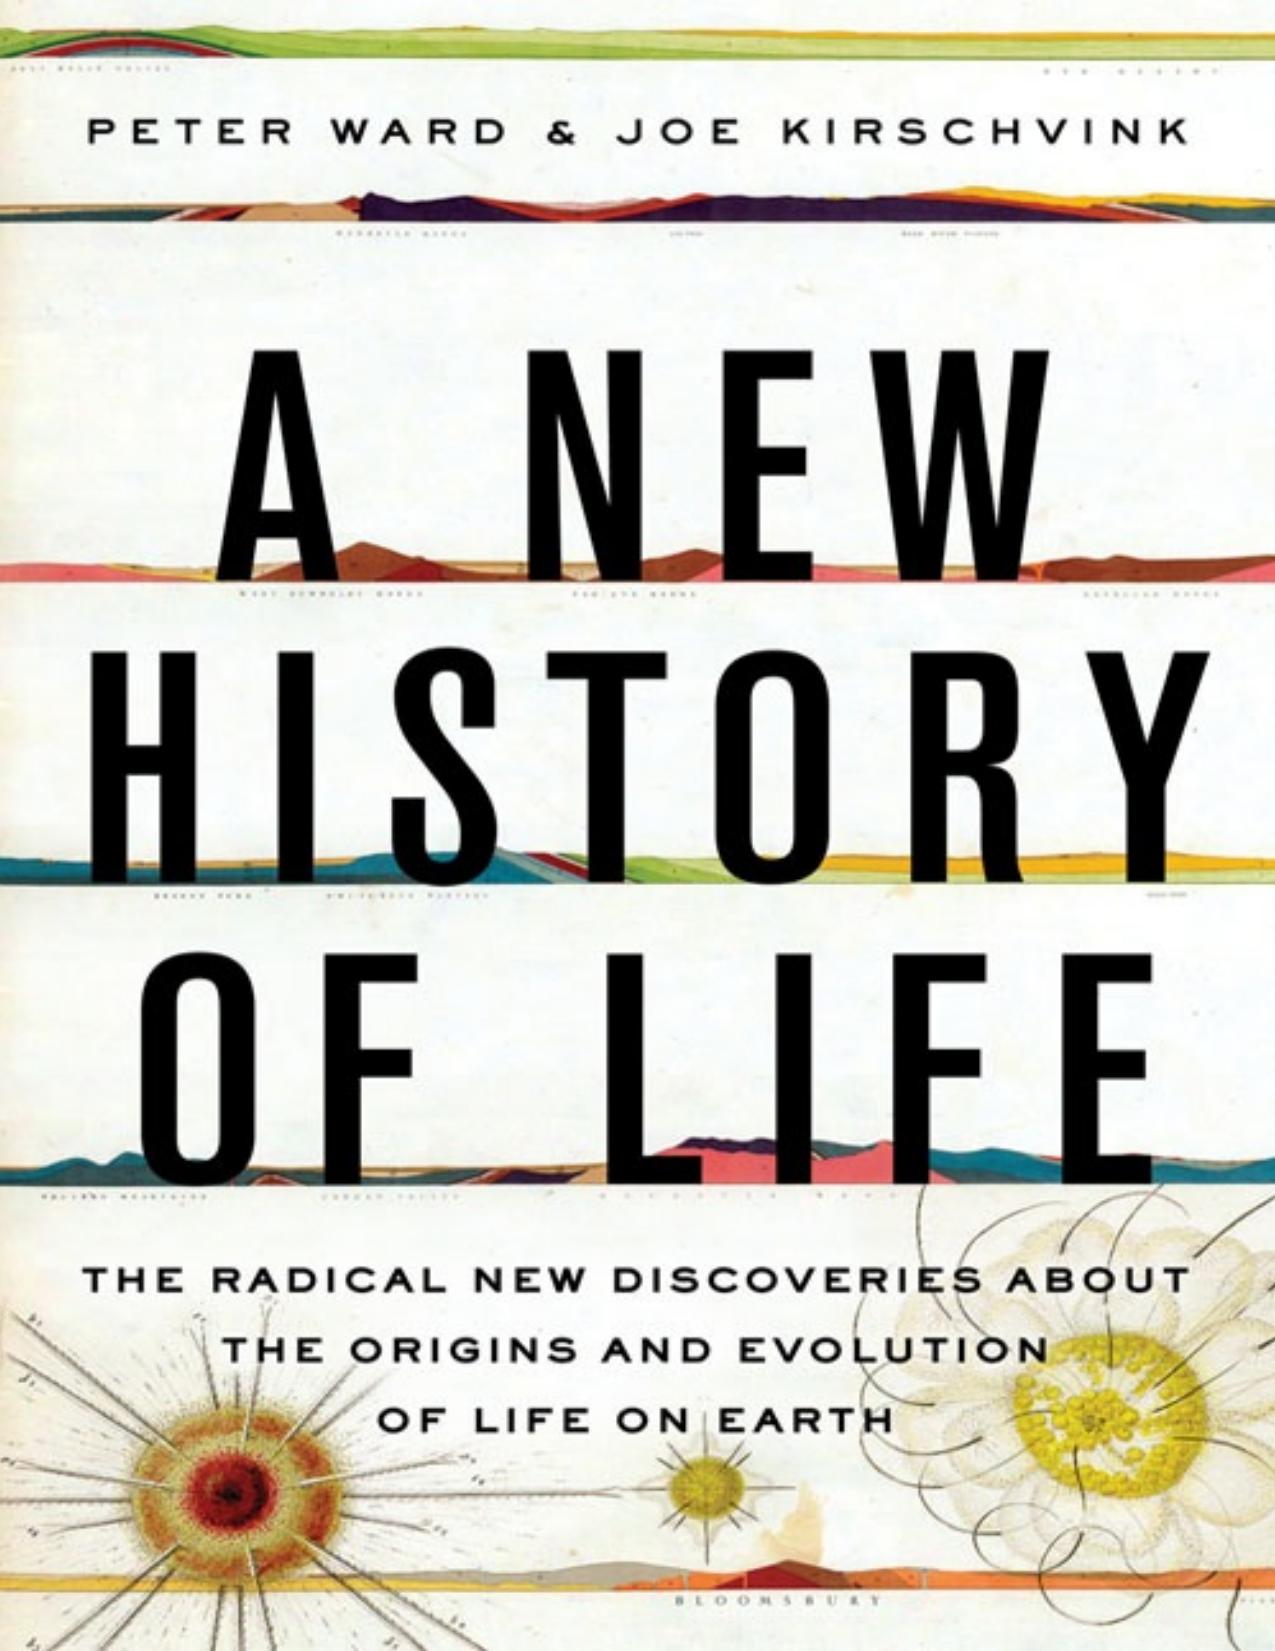 A New History of Life: The Radical New Discoveries about the Origins and Evolution of Life on Earth - PDFDrive.com